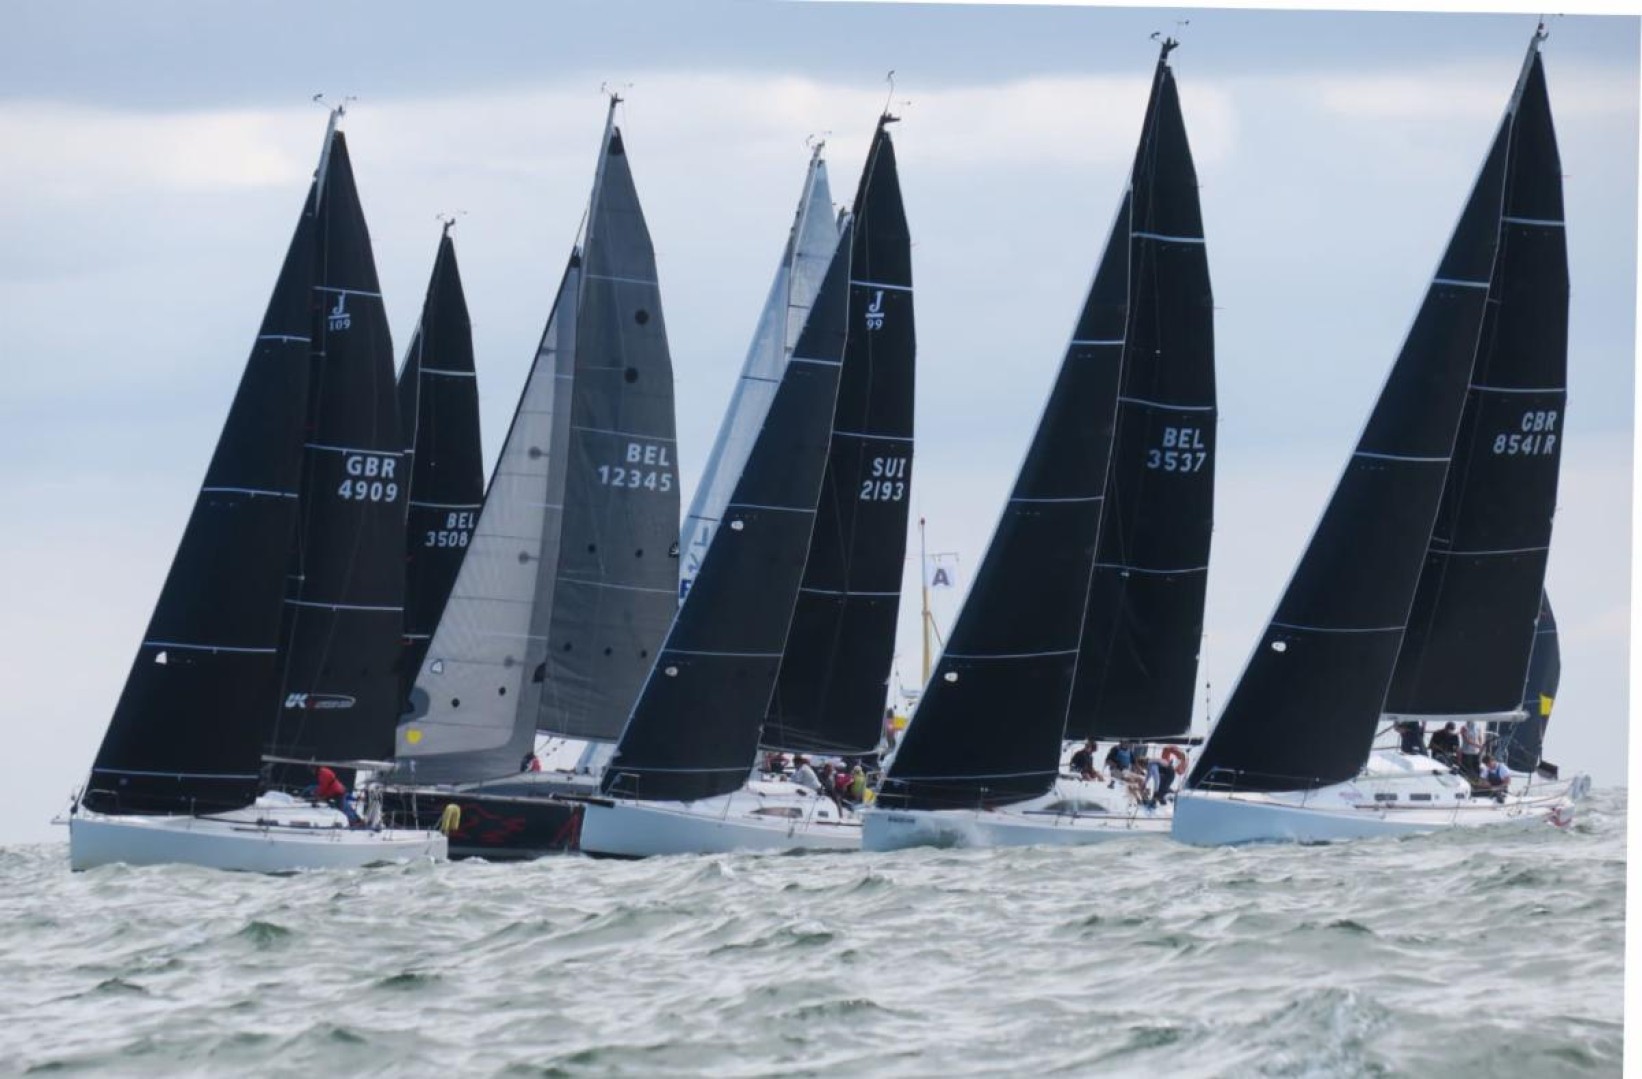 IRC Two racing gets underway at Day 3 of the IRC Europeans    Image: Ineke Peltzer